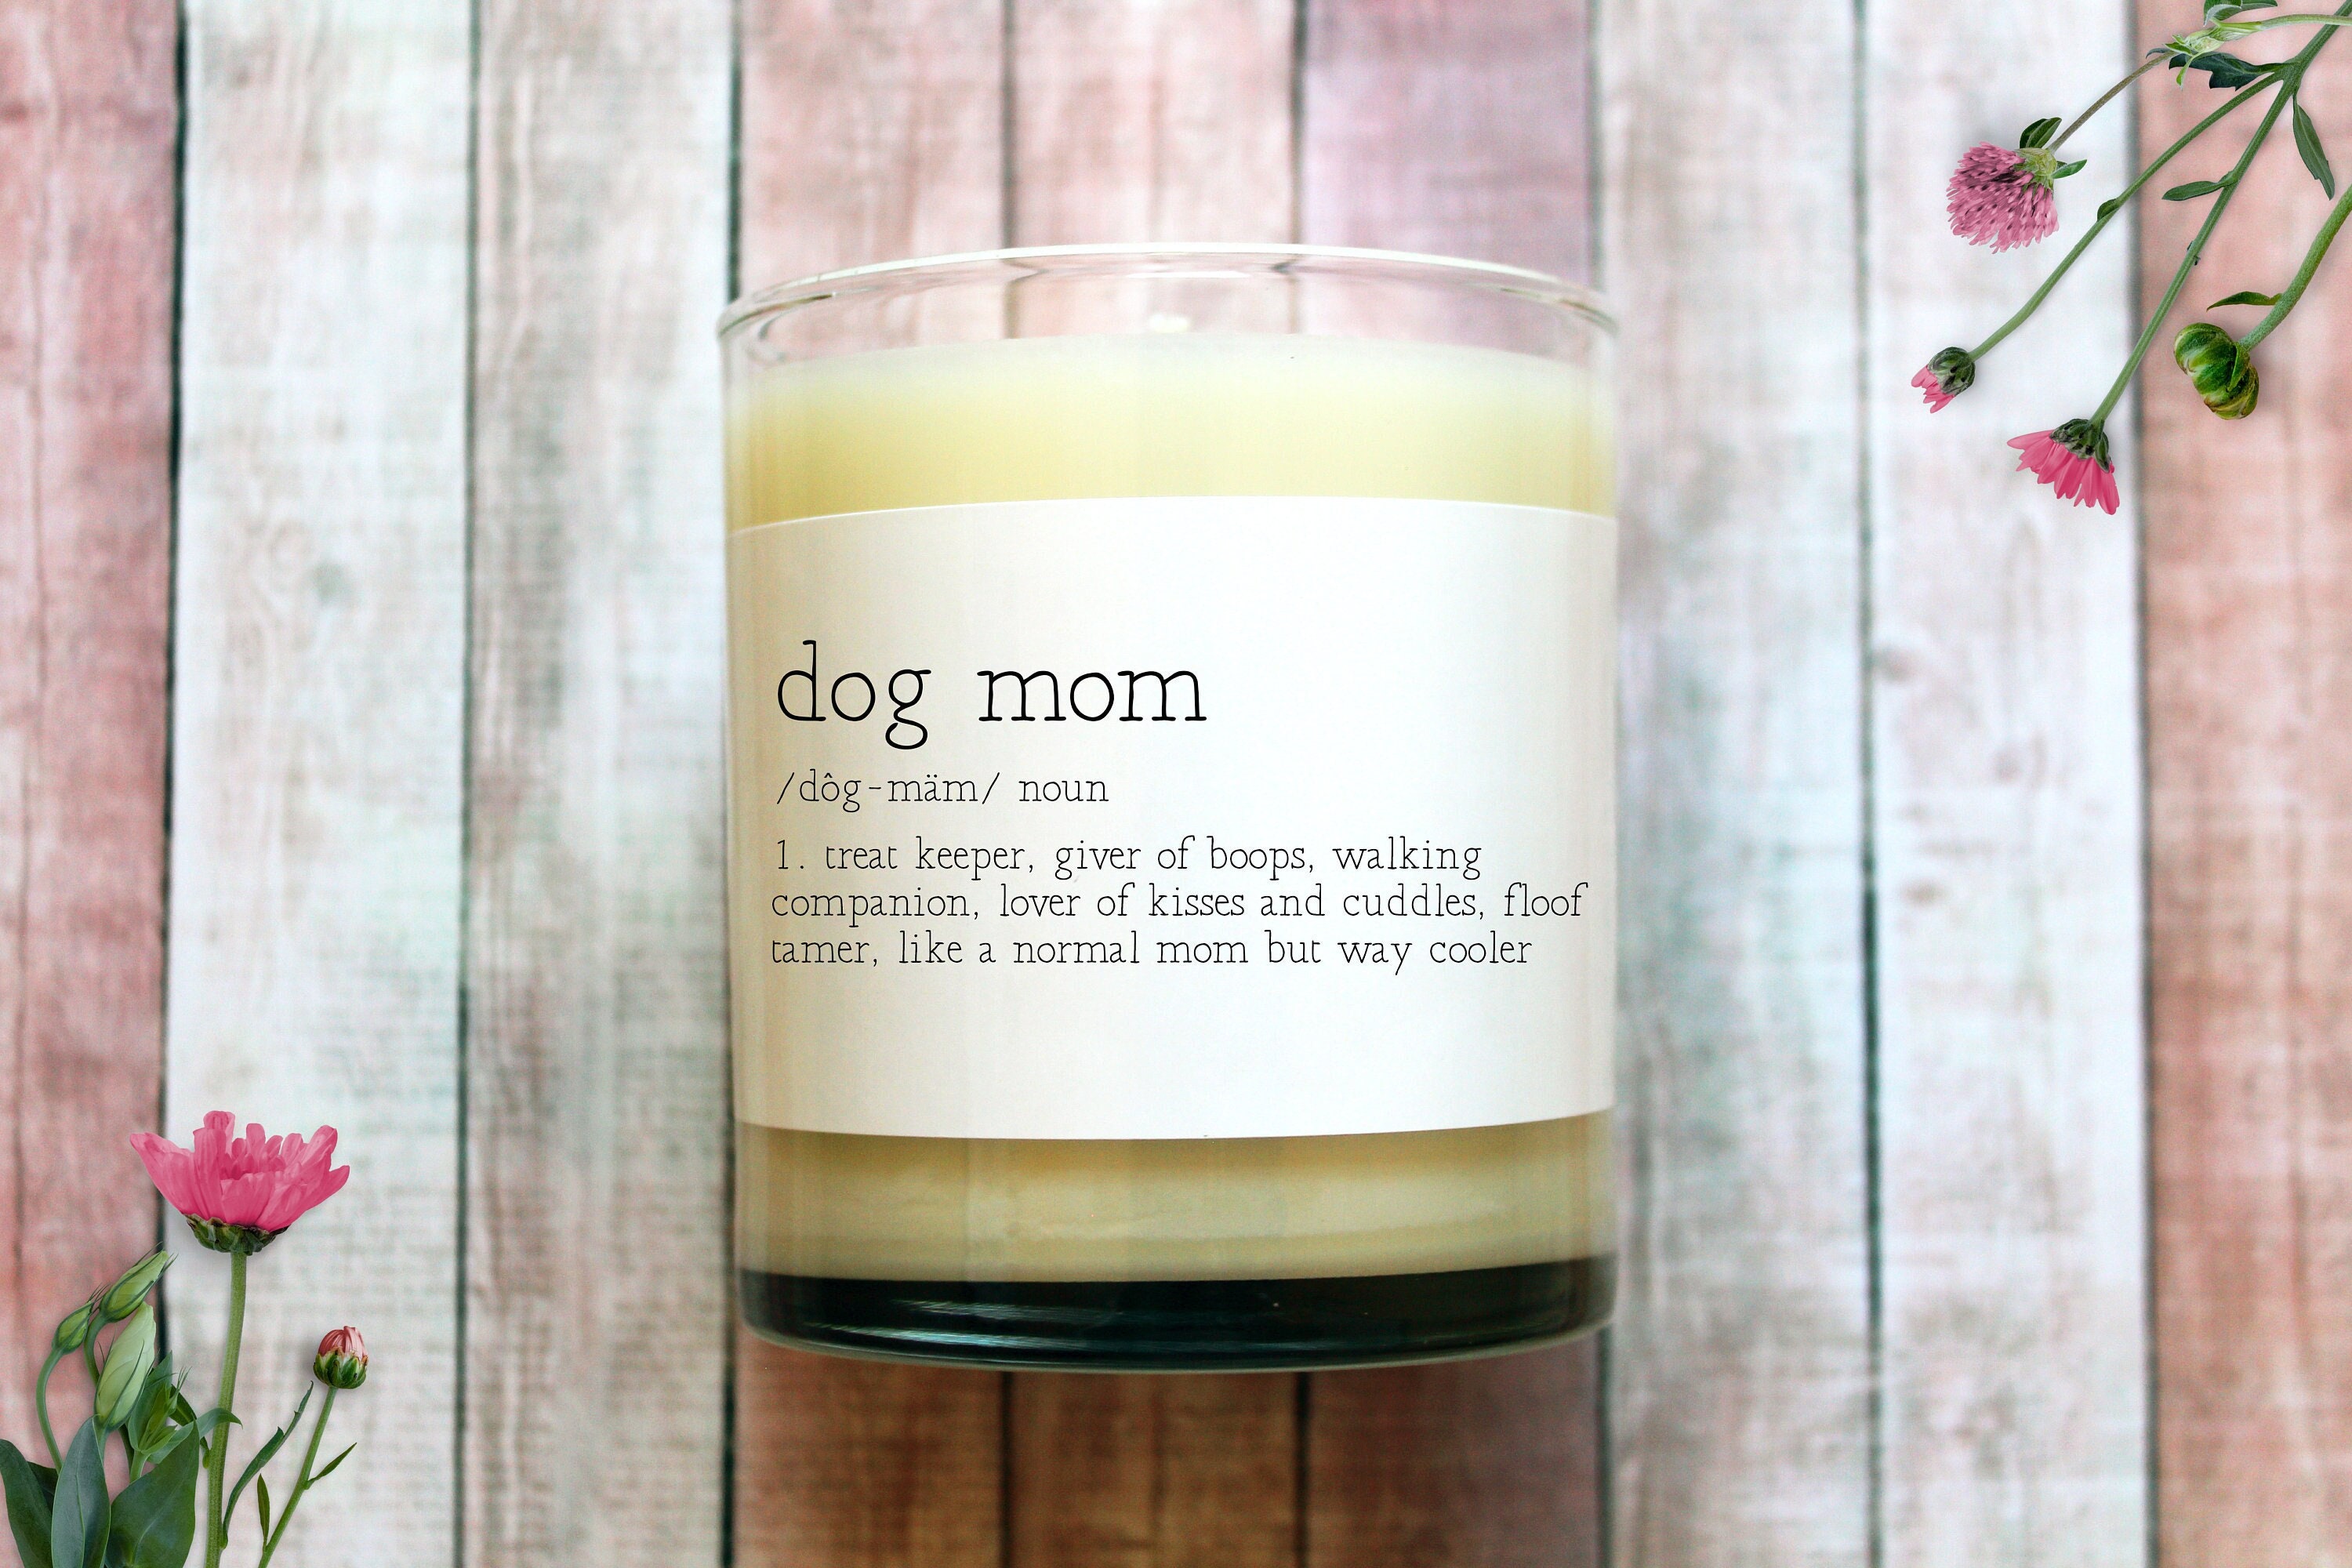  LaPomme Fairy Dogmother Candle Mum Gift, Funny, Mom Dog Lover  Dog Walker Gift, Mother's Day Candle Gift from Dog, Dog Mum Definition 9oz  d0dD30 : Home & Kitchen